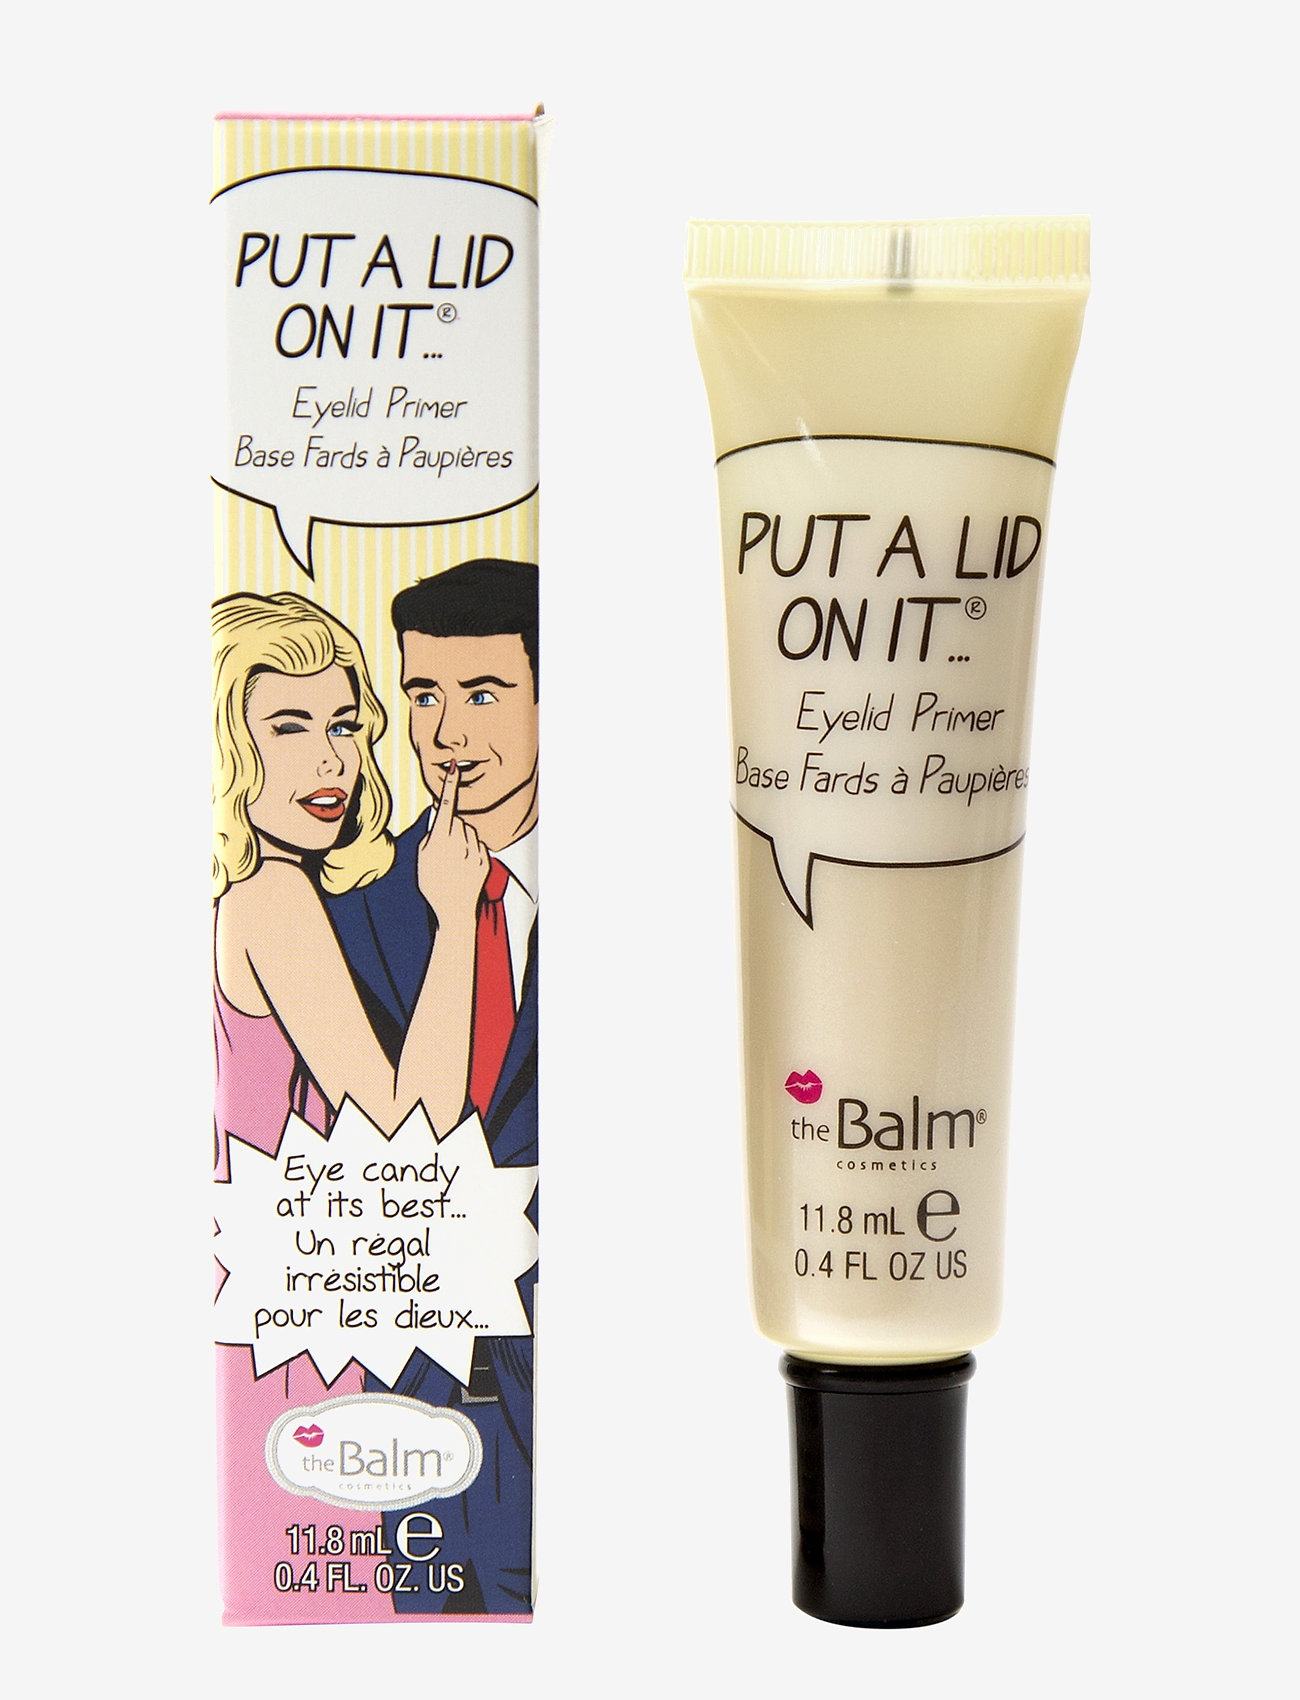 The Balm - PUT A LID ON IT® Eyelid Primer - party wear at outlet prices - translucent - 1